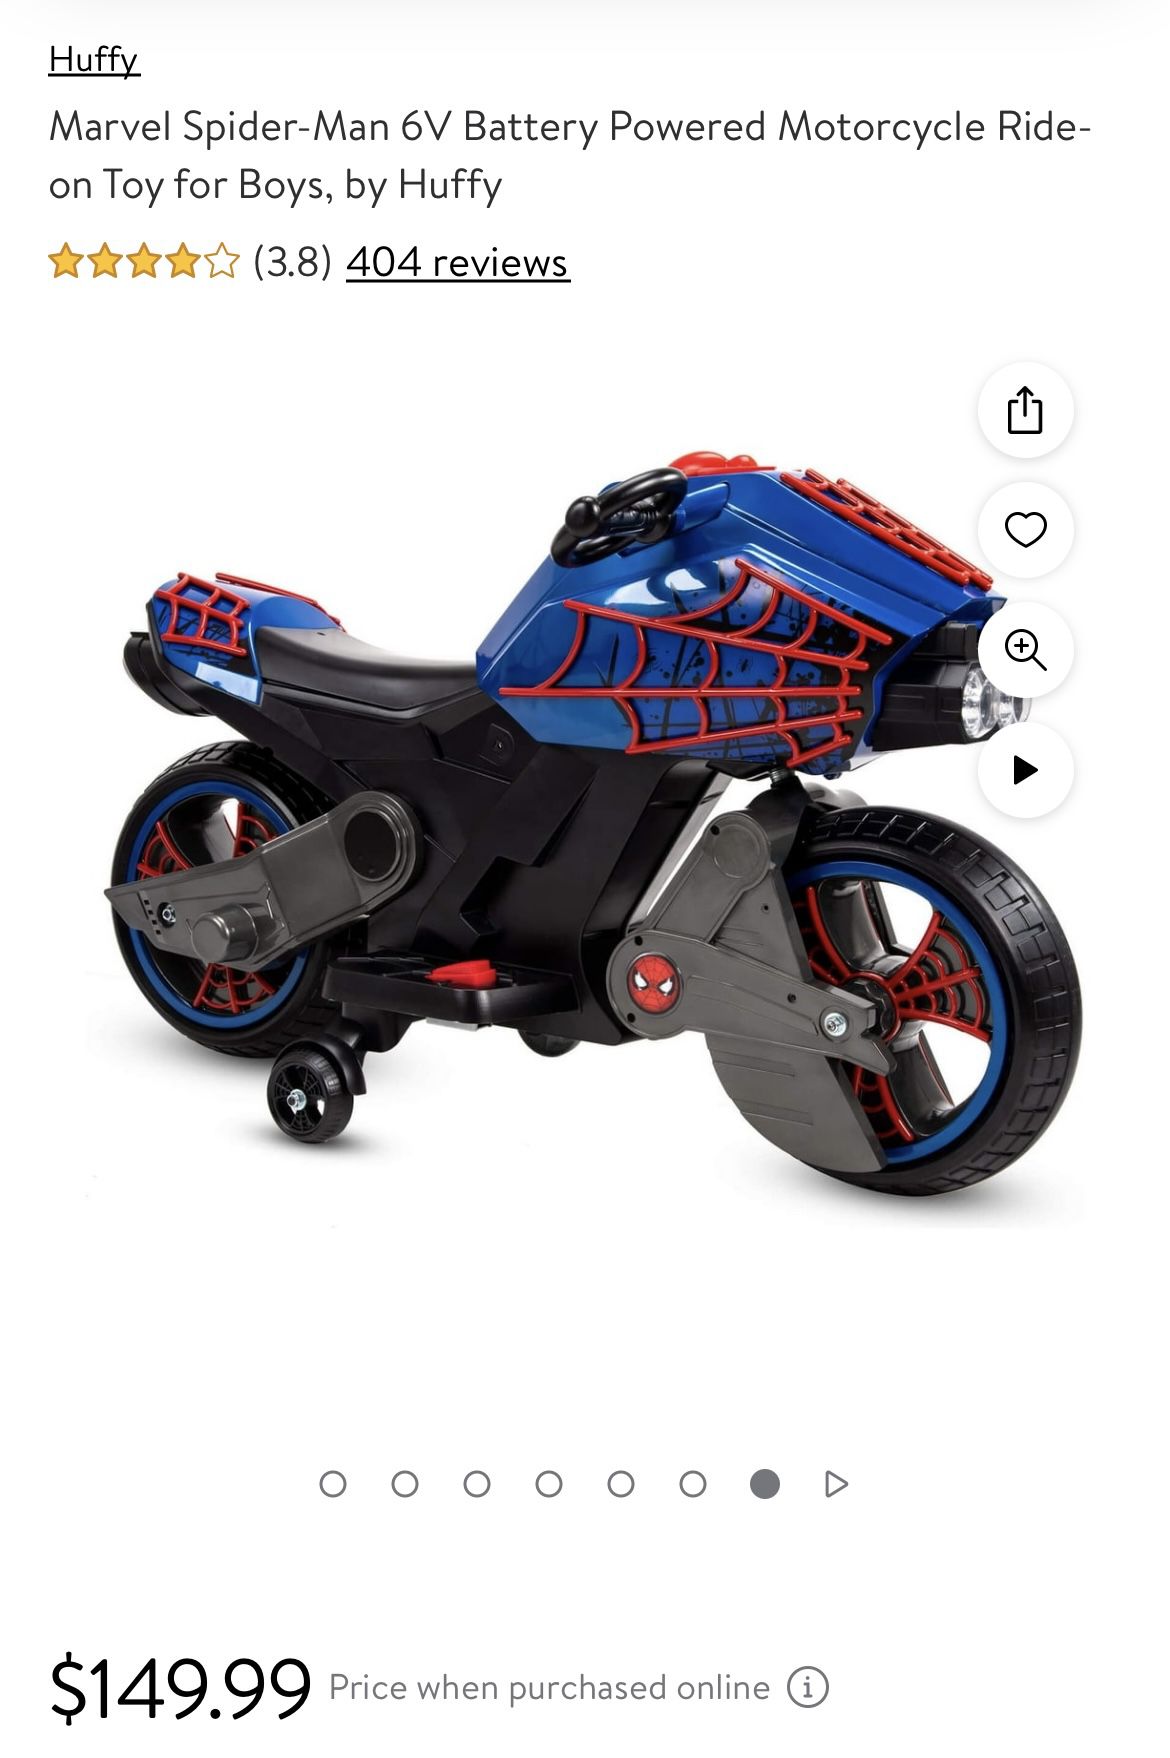 Motorcycle Ride- On   Toy For Boys 